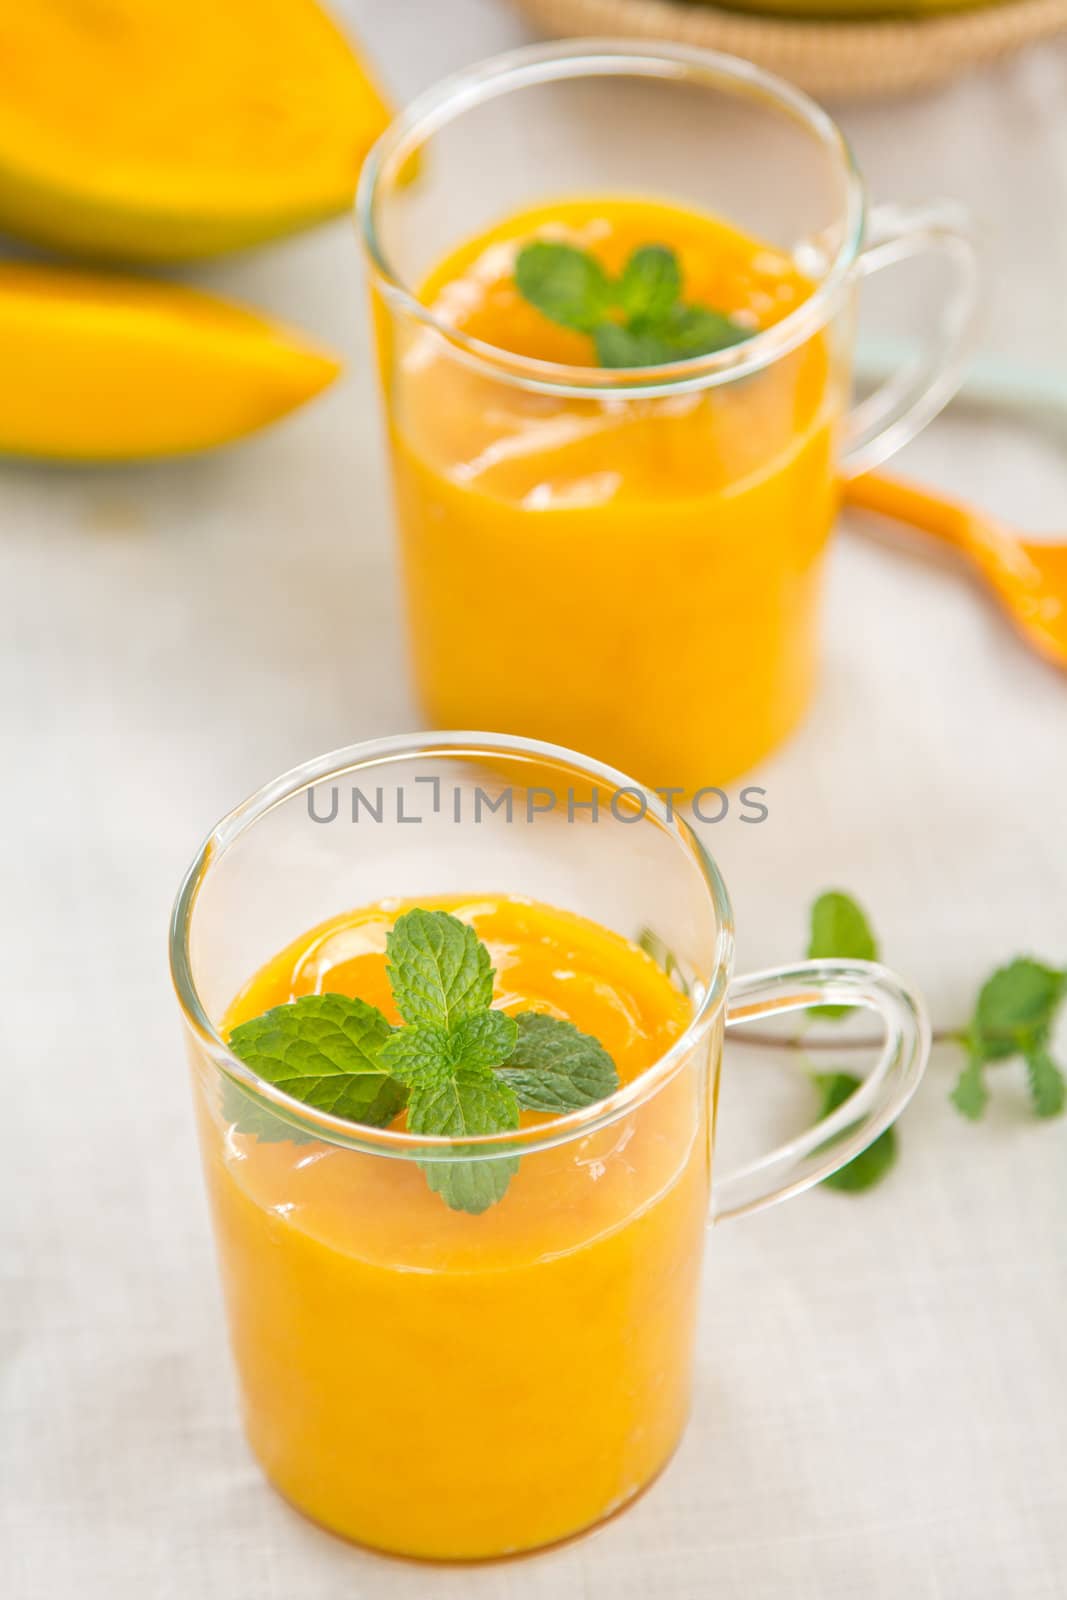 Mango smoothie with mint by some fresh mango